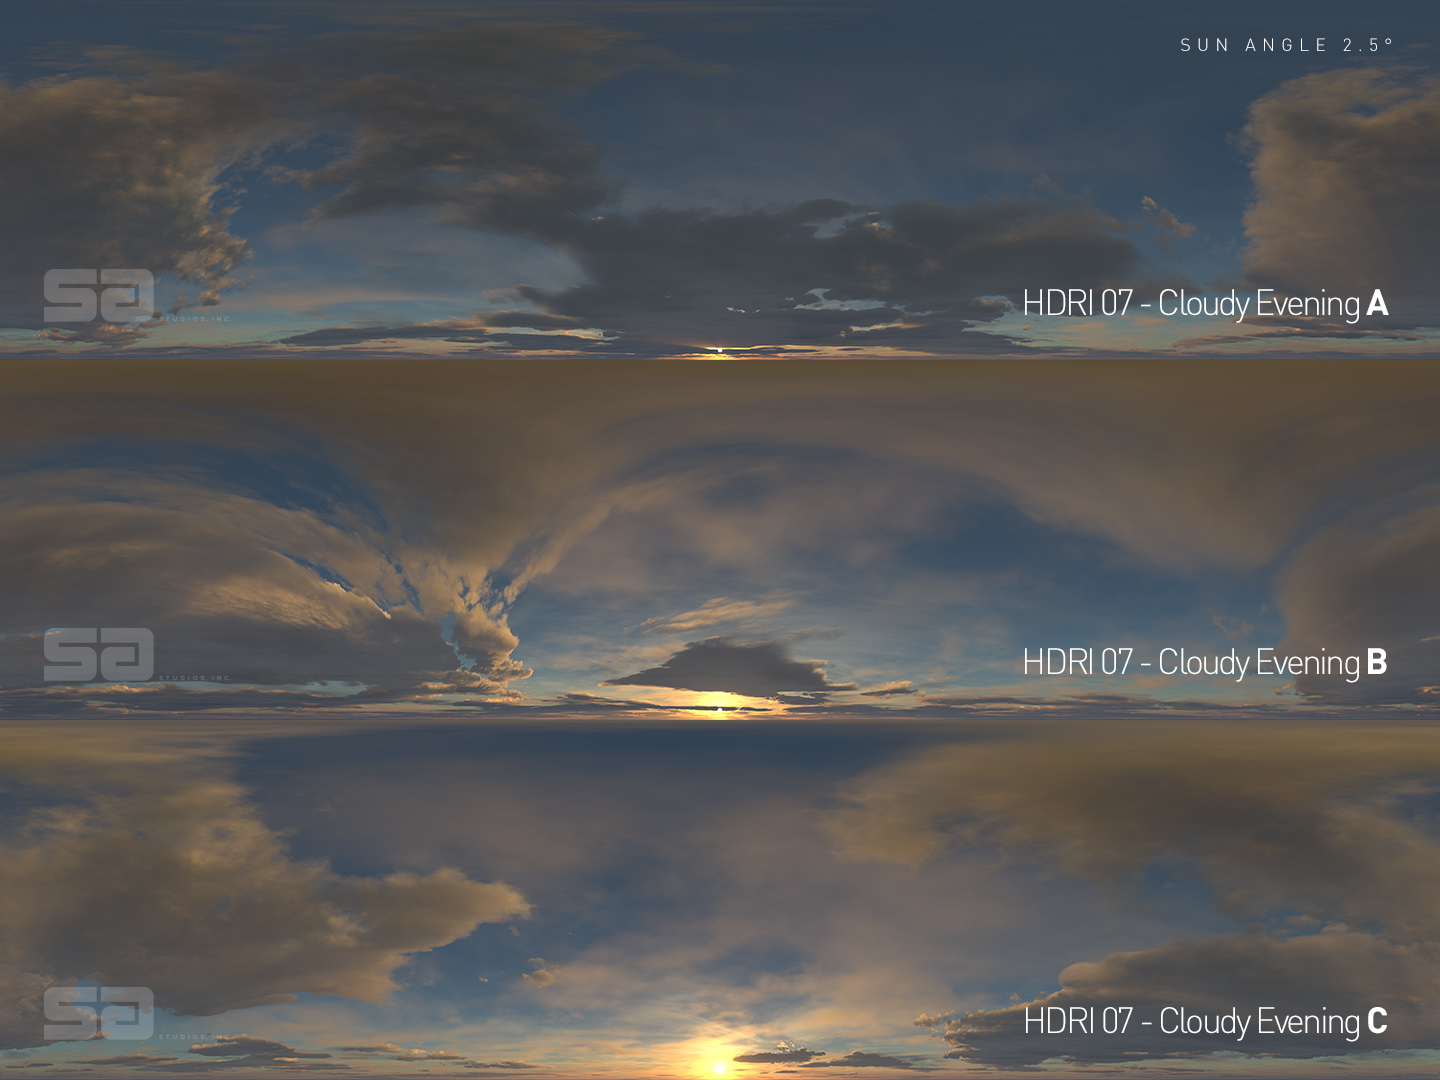 CG HDRI / Winter Collection Skies 01 from helloluxx